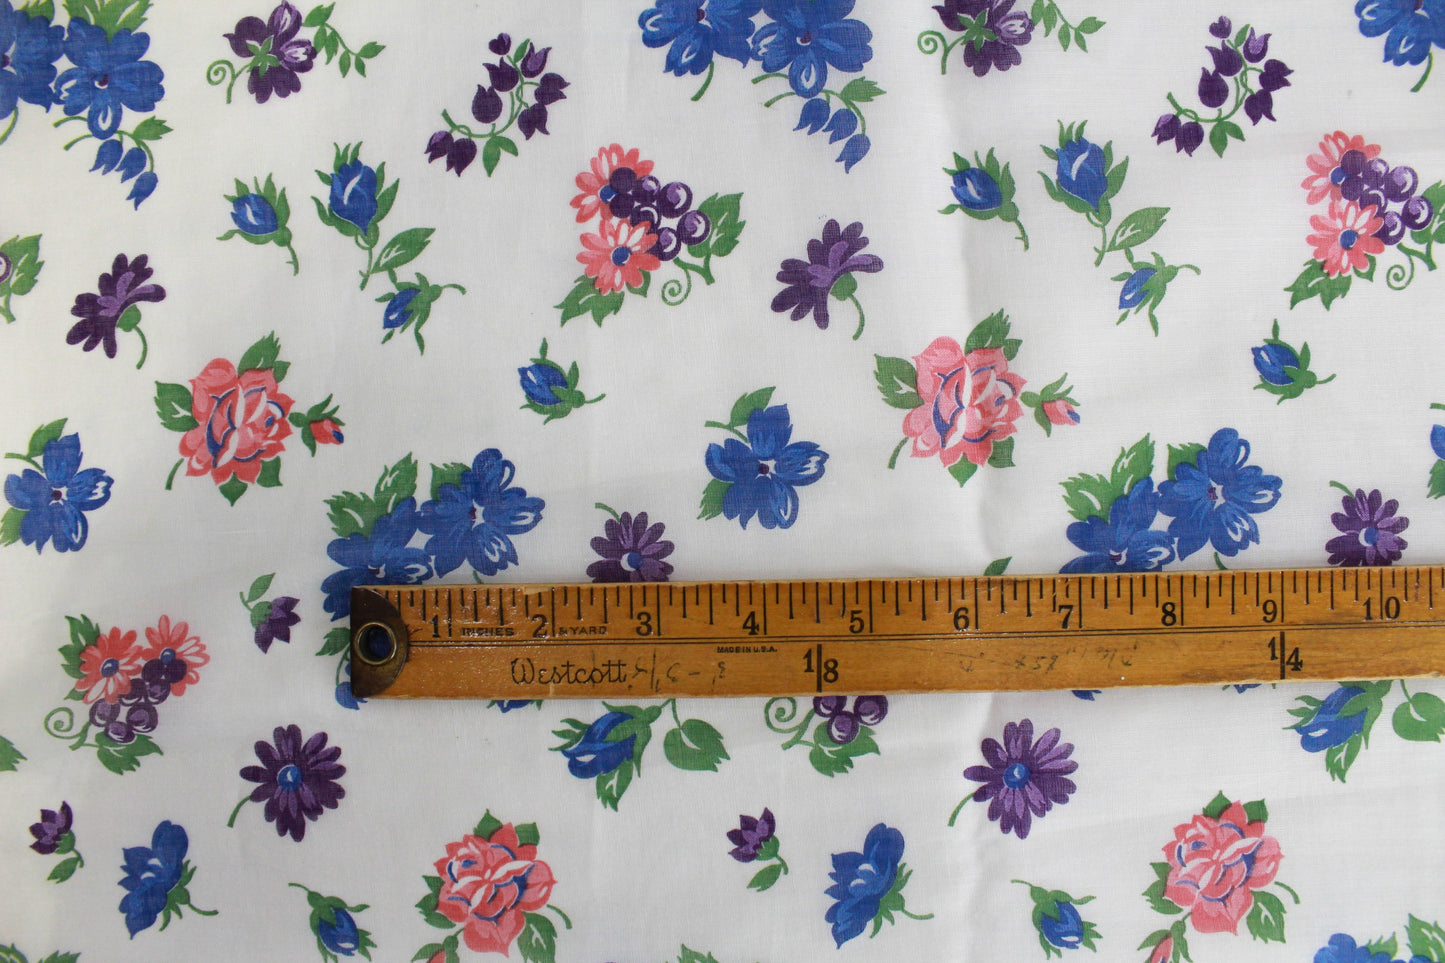 1940s cotton voile fabric sheer white with blue purple and pink flower print